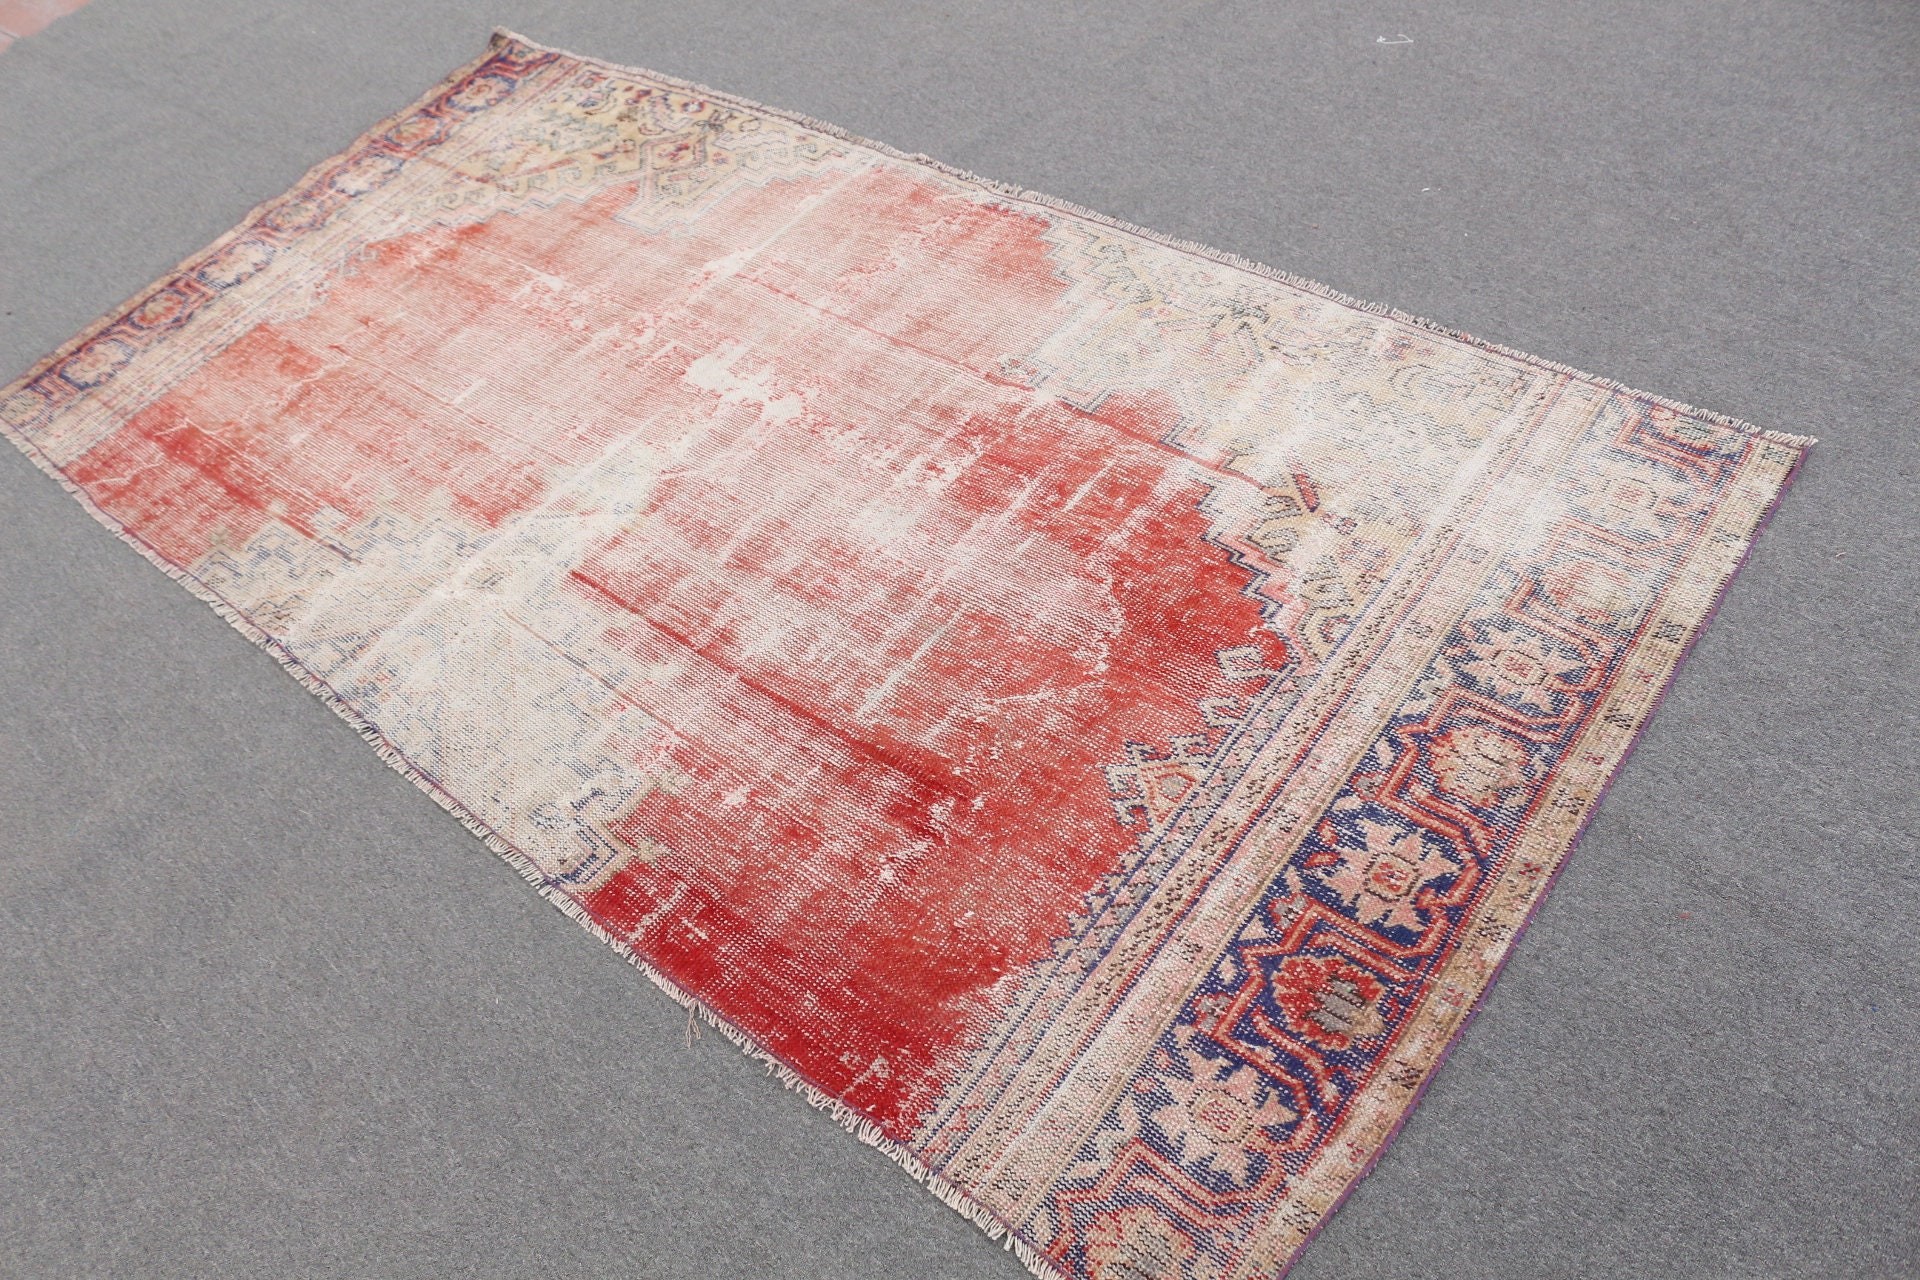 9.9x4.8 ft Large Rug, Moroccan Rug, Turkish Rug, Bedroom Rug, Rugs for Salon, Salon Rug, Red Kitchen Rugs, Anatolian Rugs, Vintage Rugs